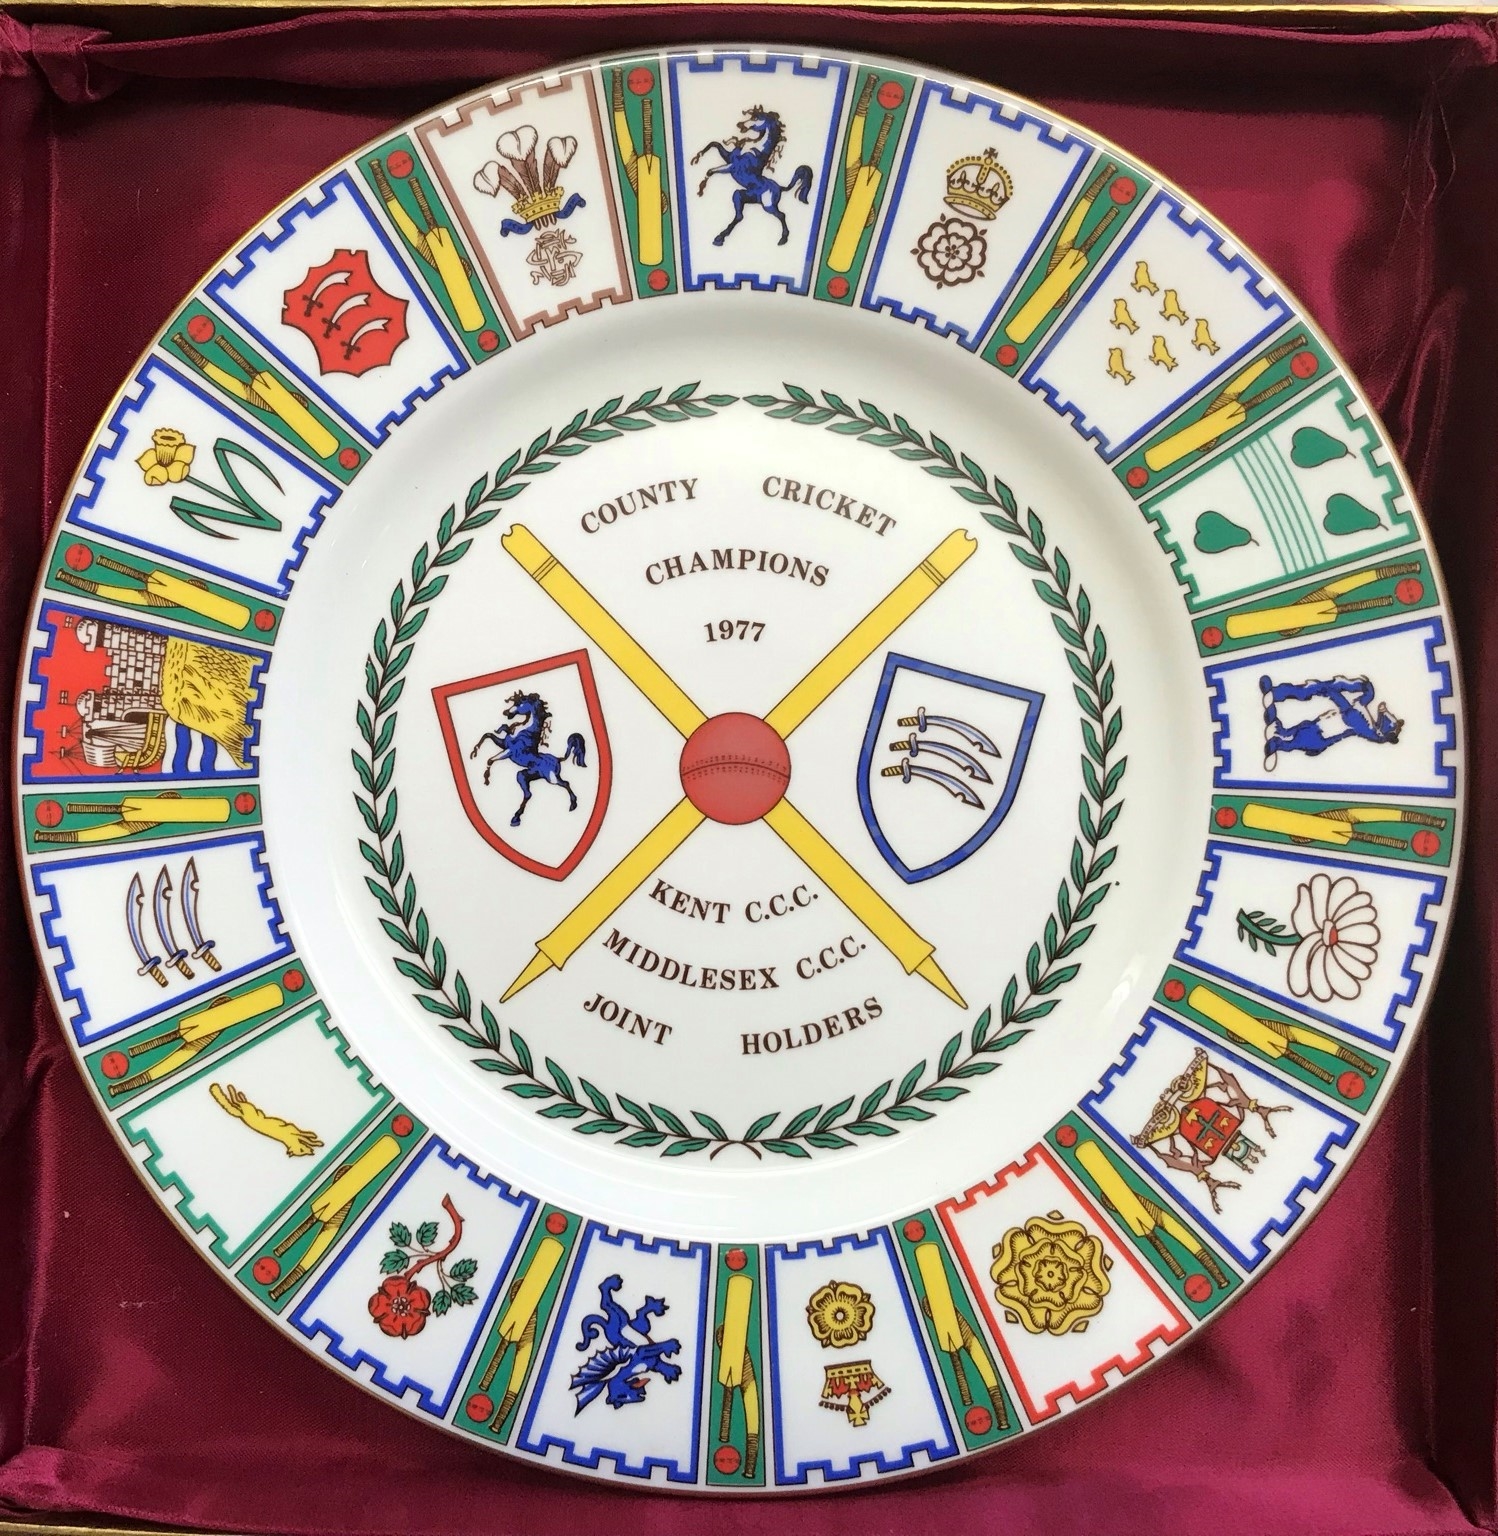 Kent and Middlesex 1977 County Cricket Champions (Joint holders) Coalport 10.5" Commemorative Plate,